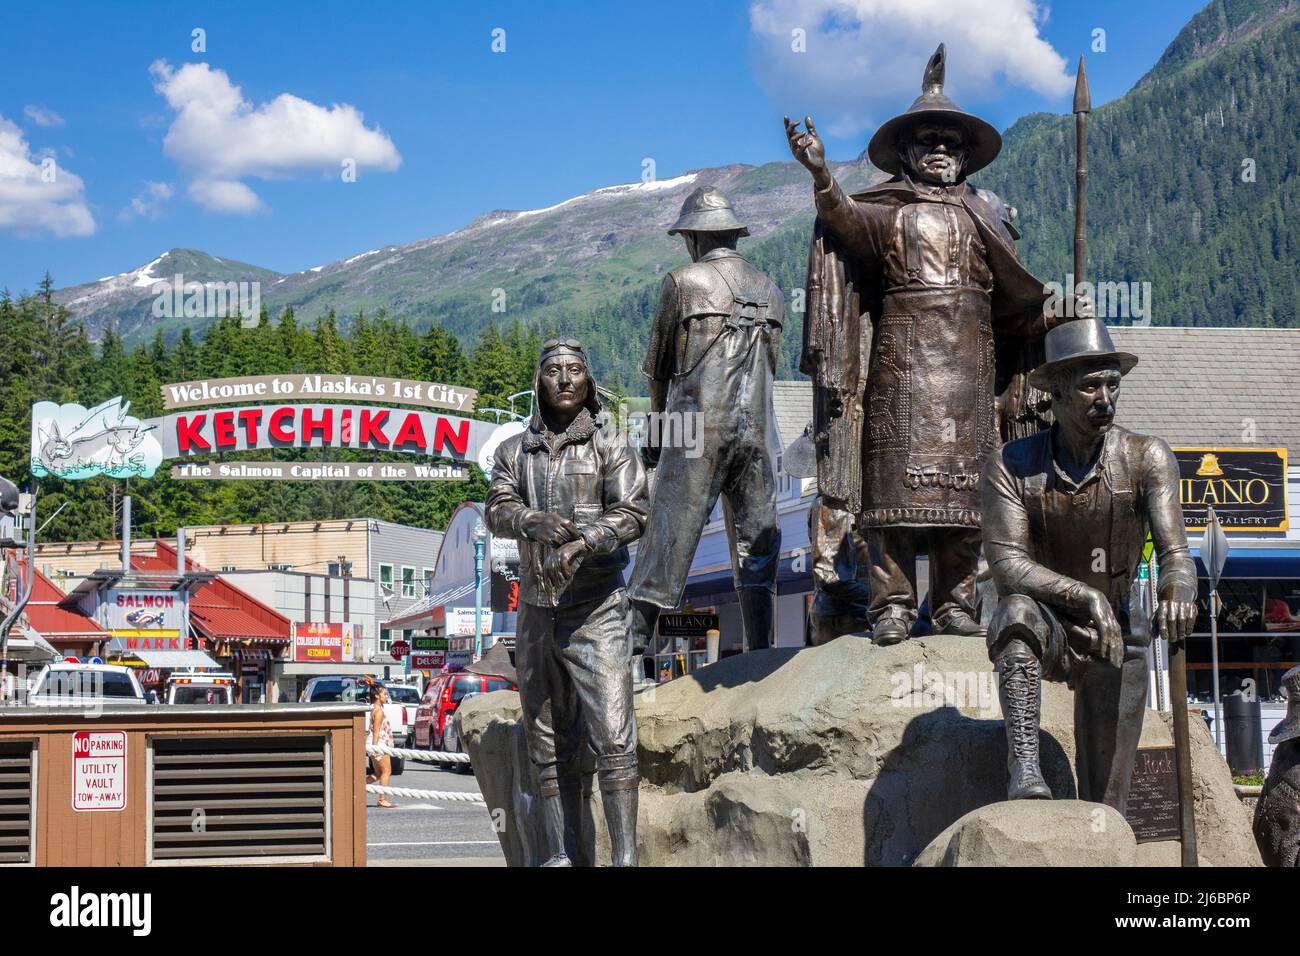 The Rock Bronze Statue In Ketchikan Alaska, Depicting The History Of People In The Early Years Of Ketchikan Alaska Stock Photo